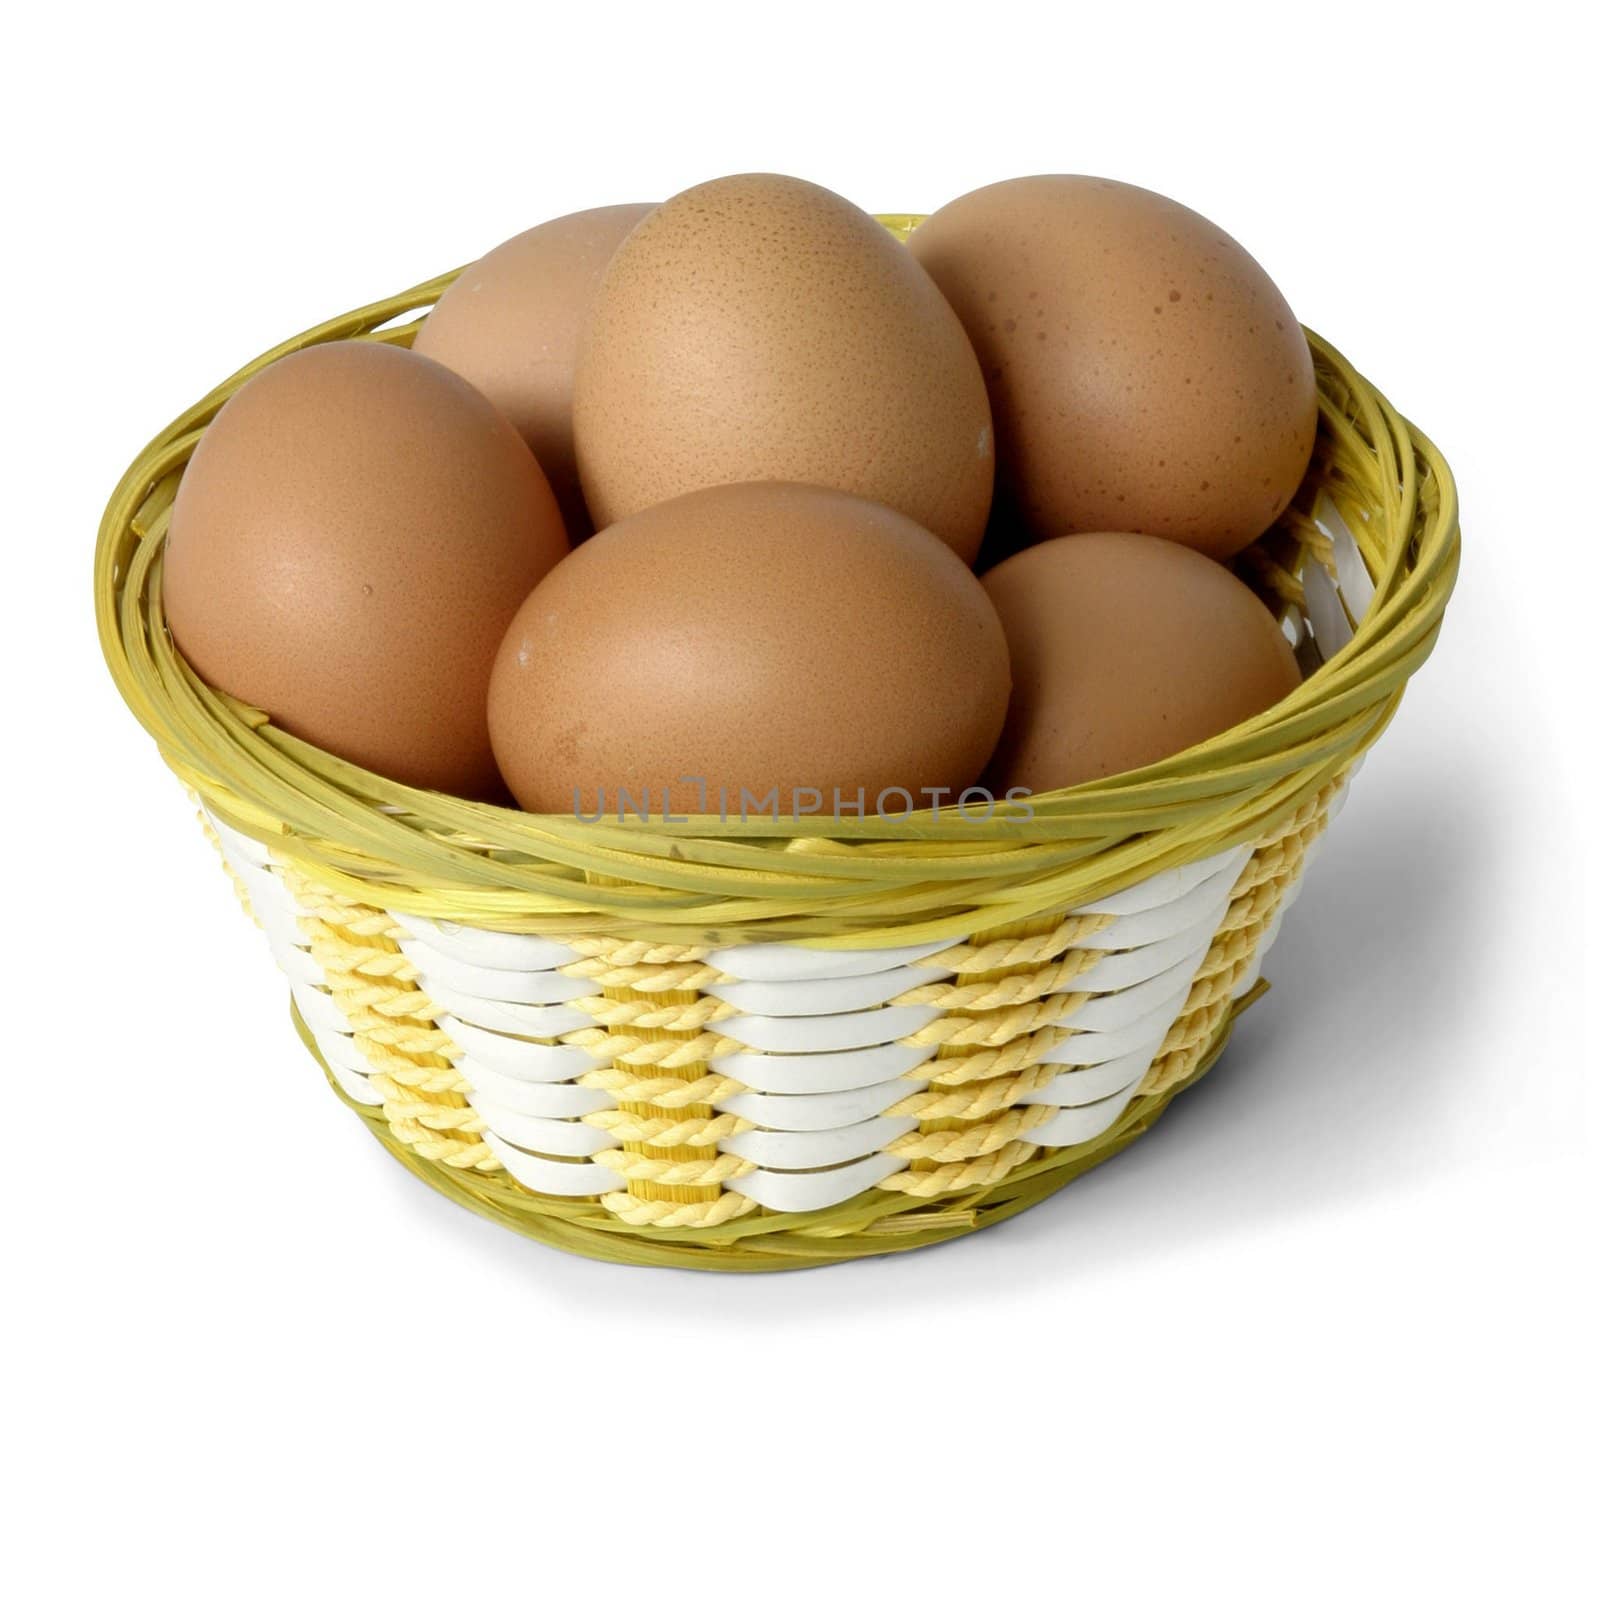 Eggs isolated on a white background.